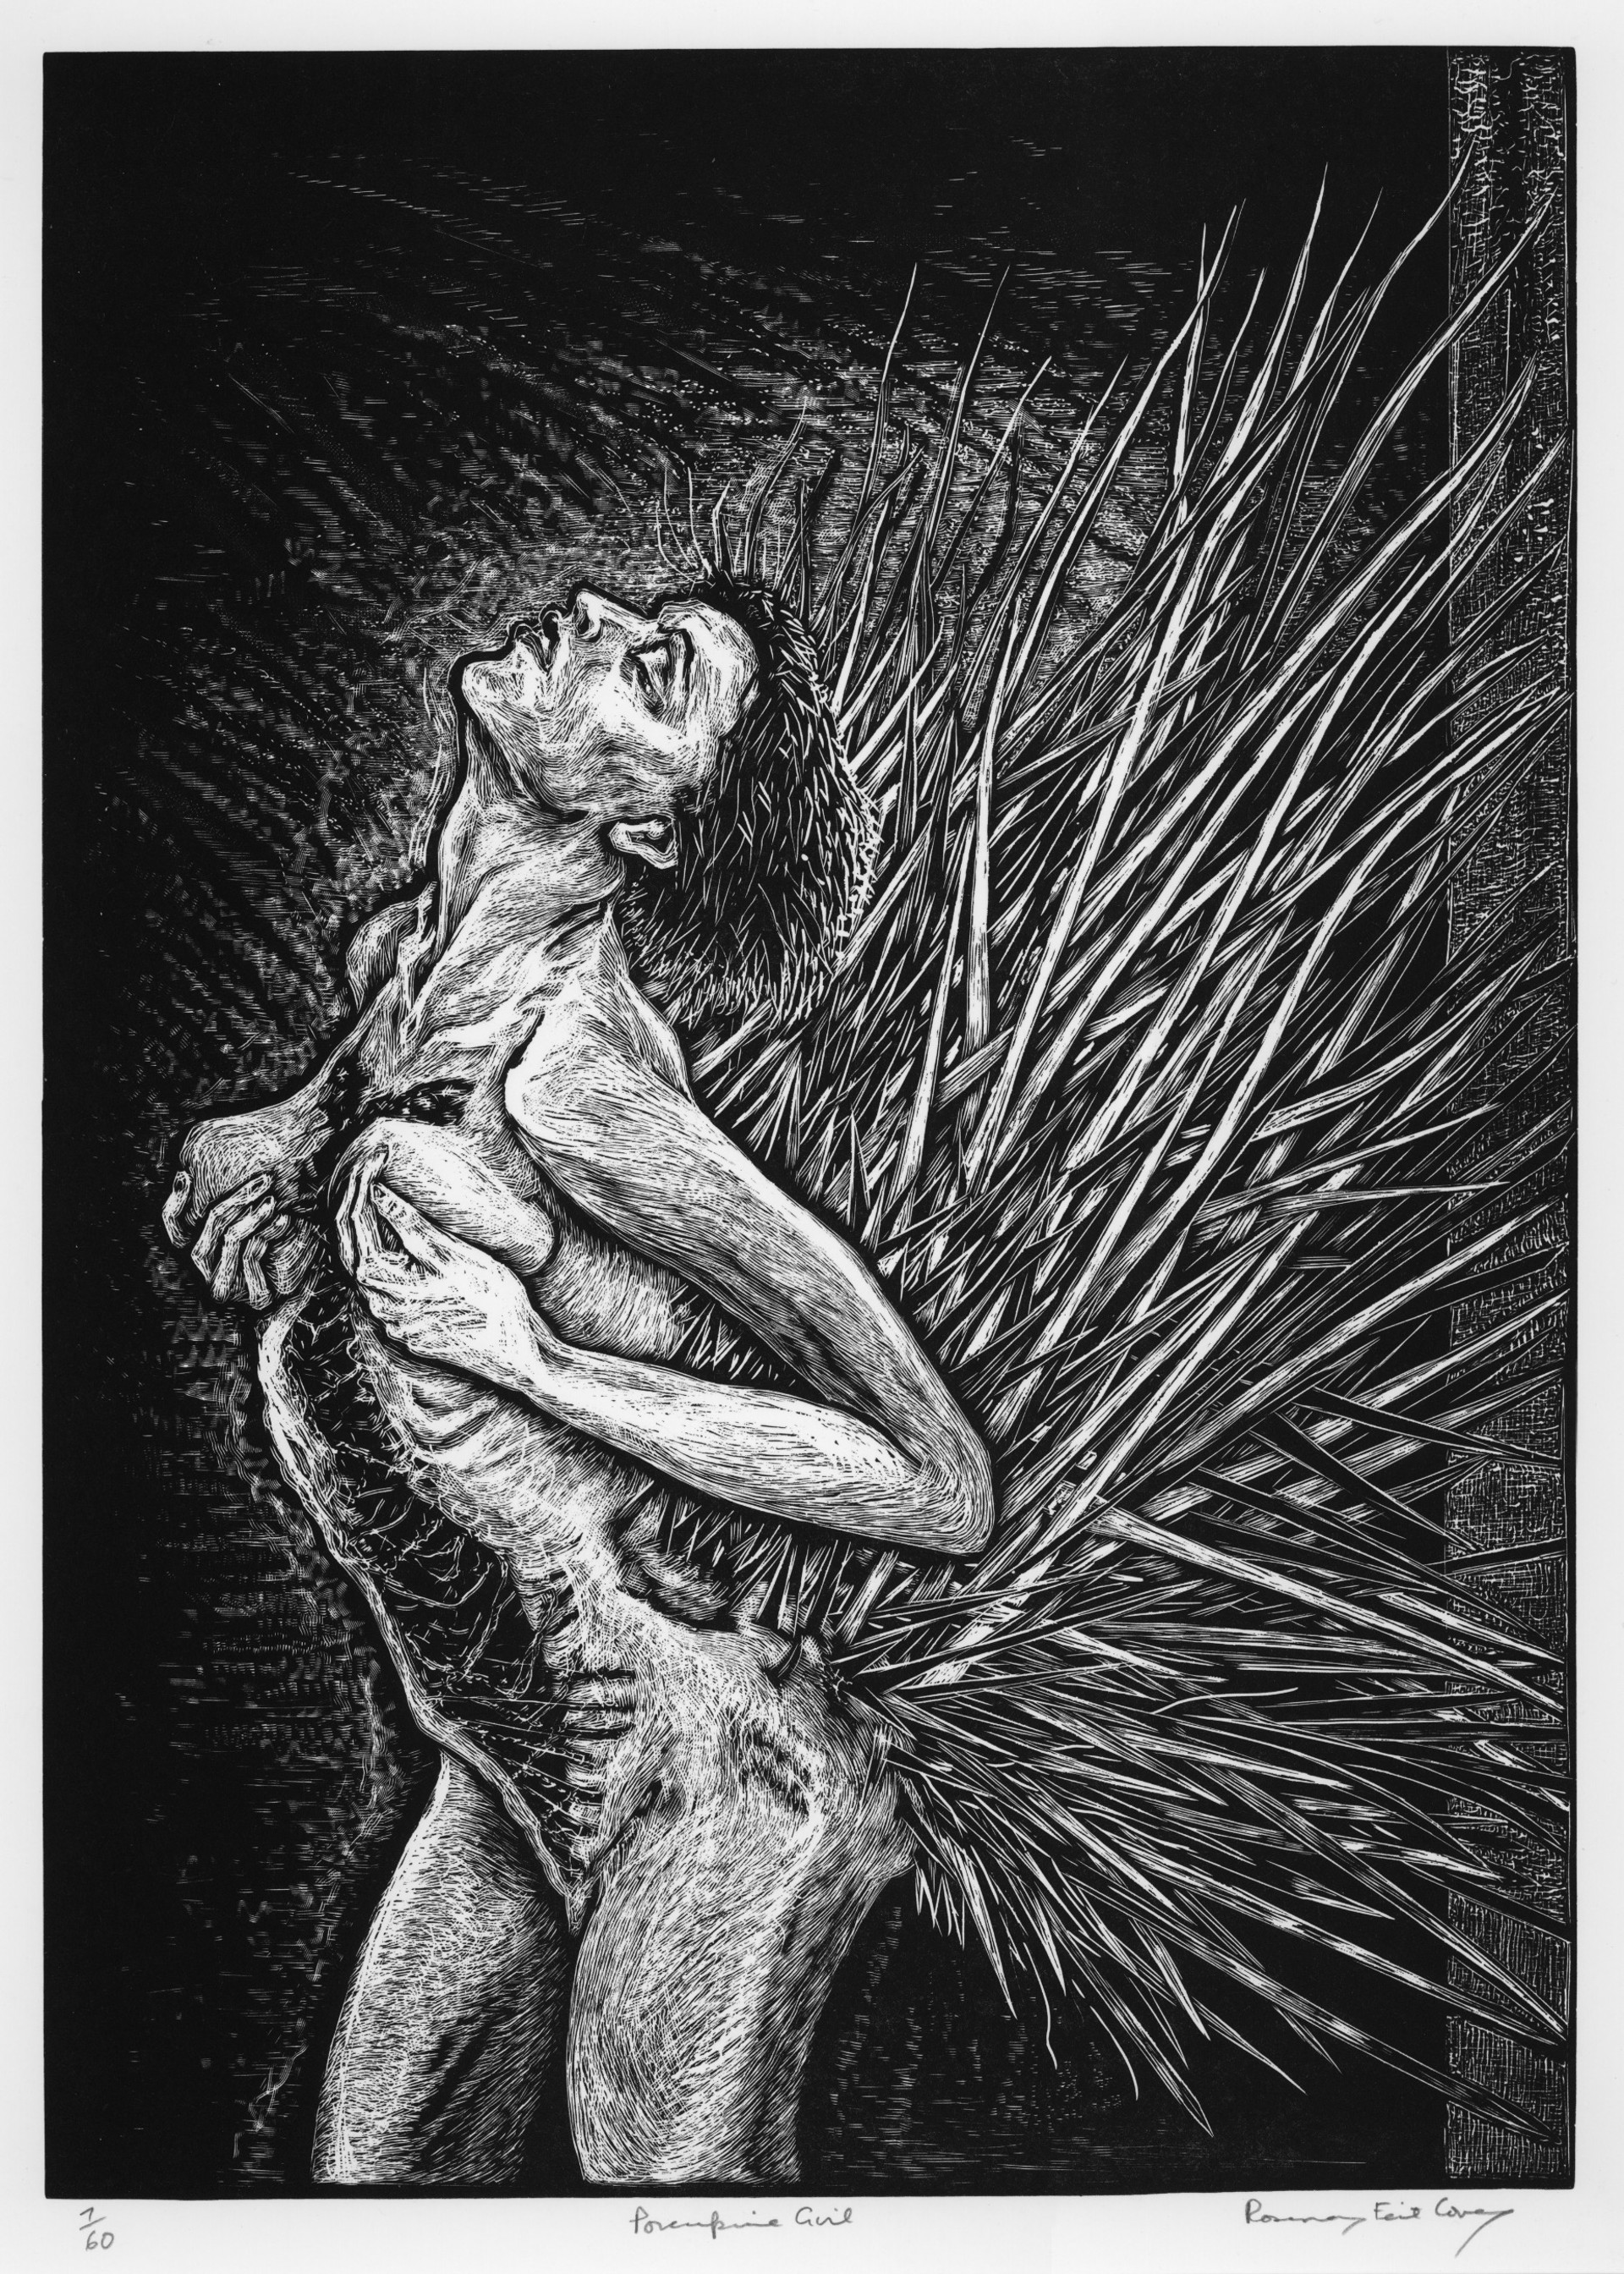 Porcupine Girl (standing) by Rosemary Feit Covey